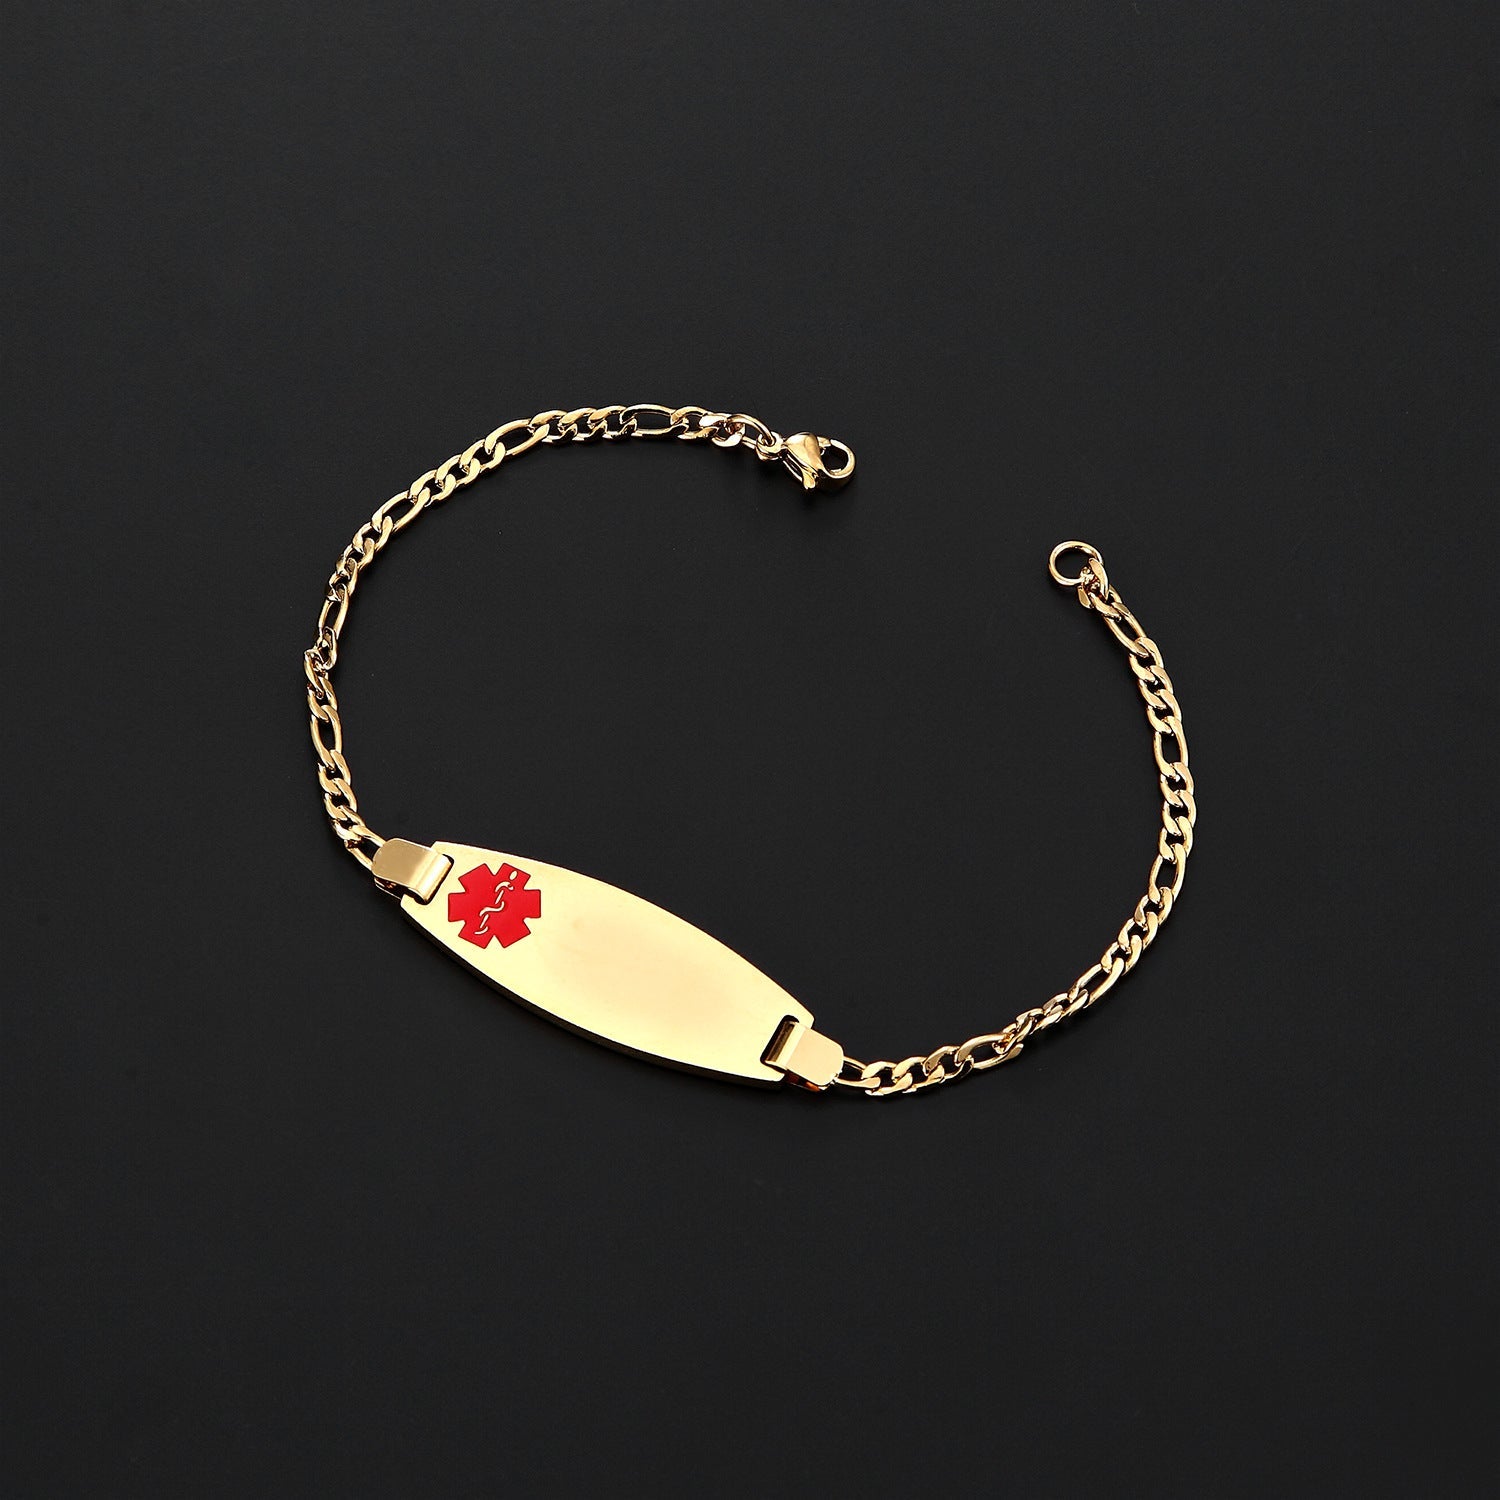 Personalised Medical ID Chain Bracelet in Gold Colour-Medical ID Bracelet-Auswara